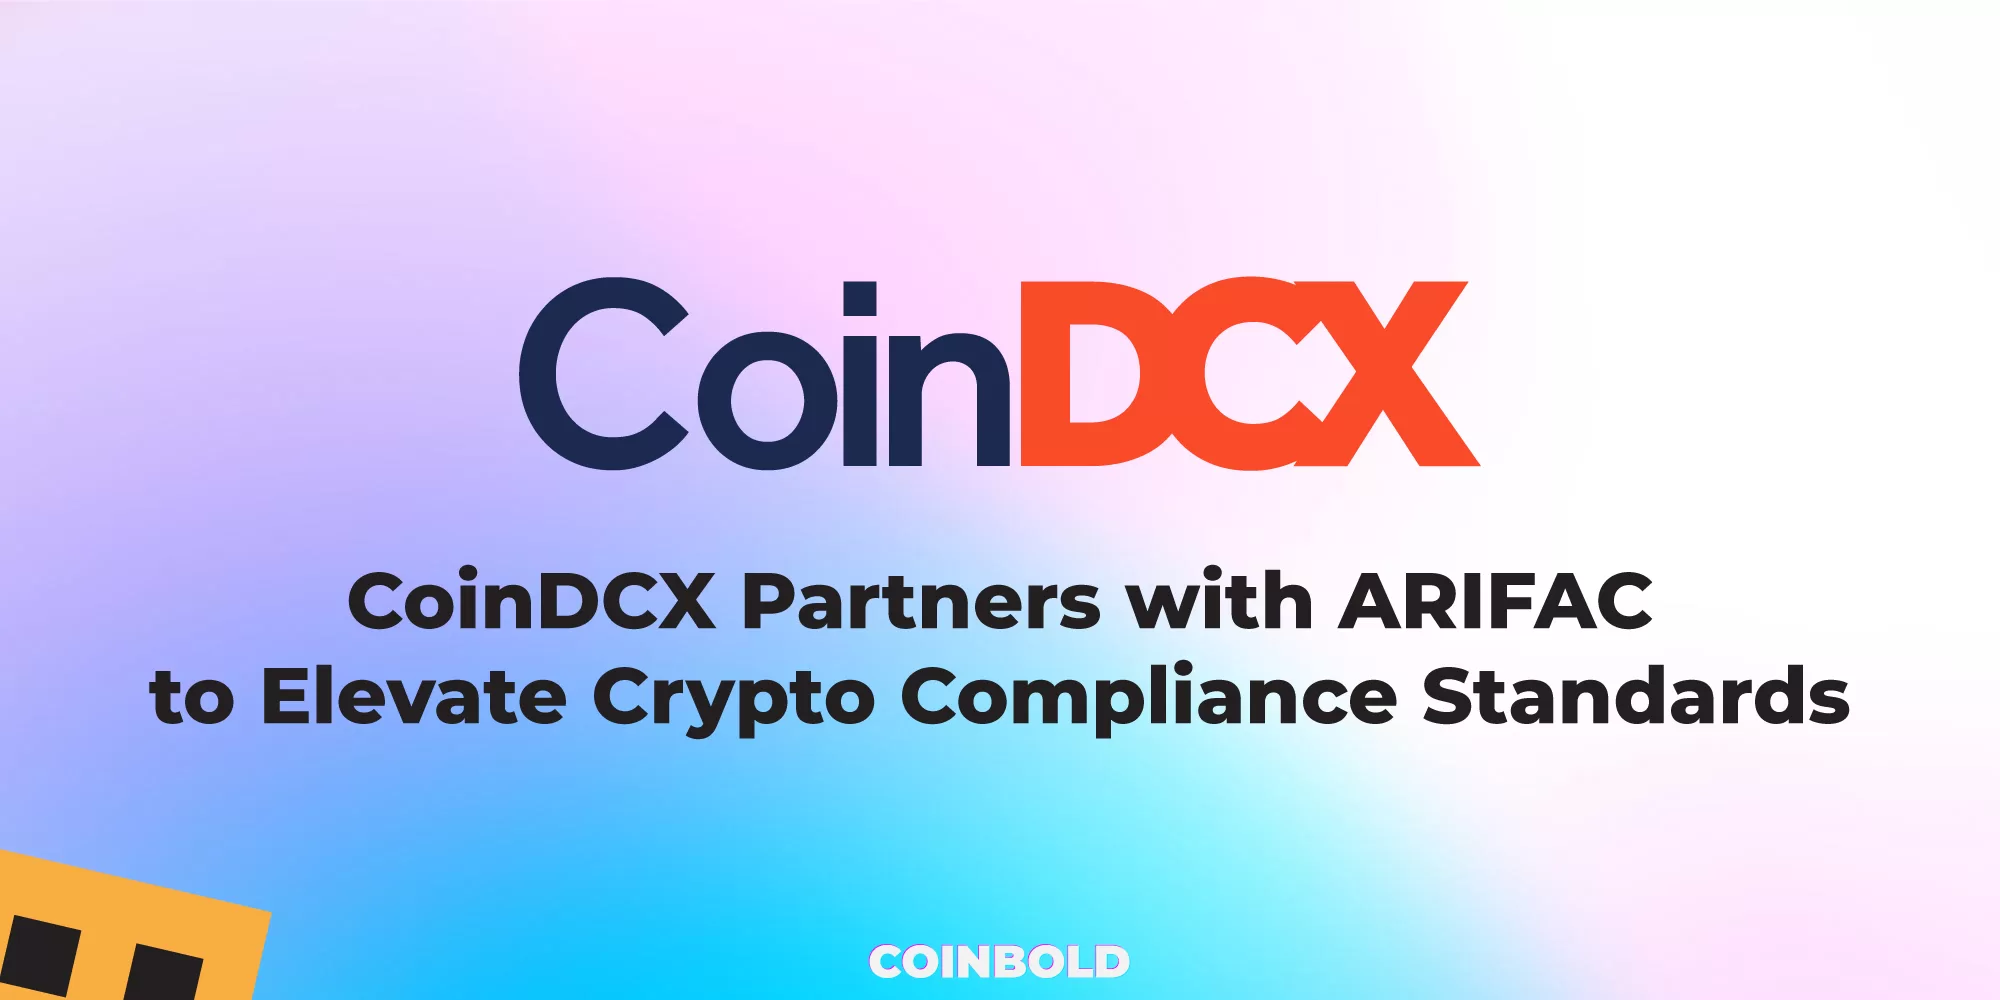 CoinDCX Partners with ARIFAC to Elevate Crypto Compliance Standards